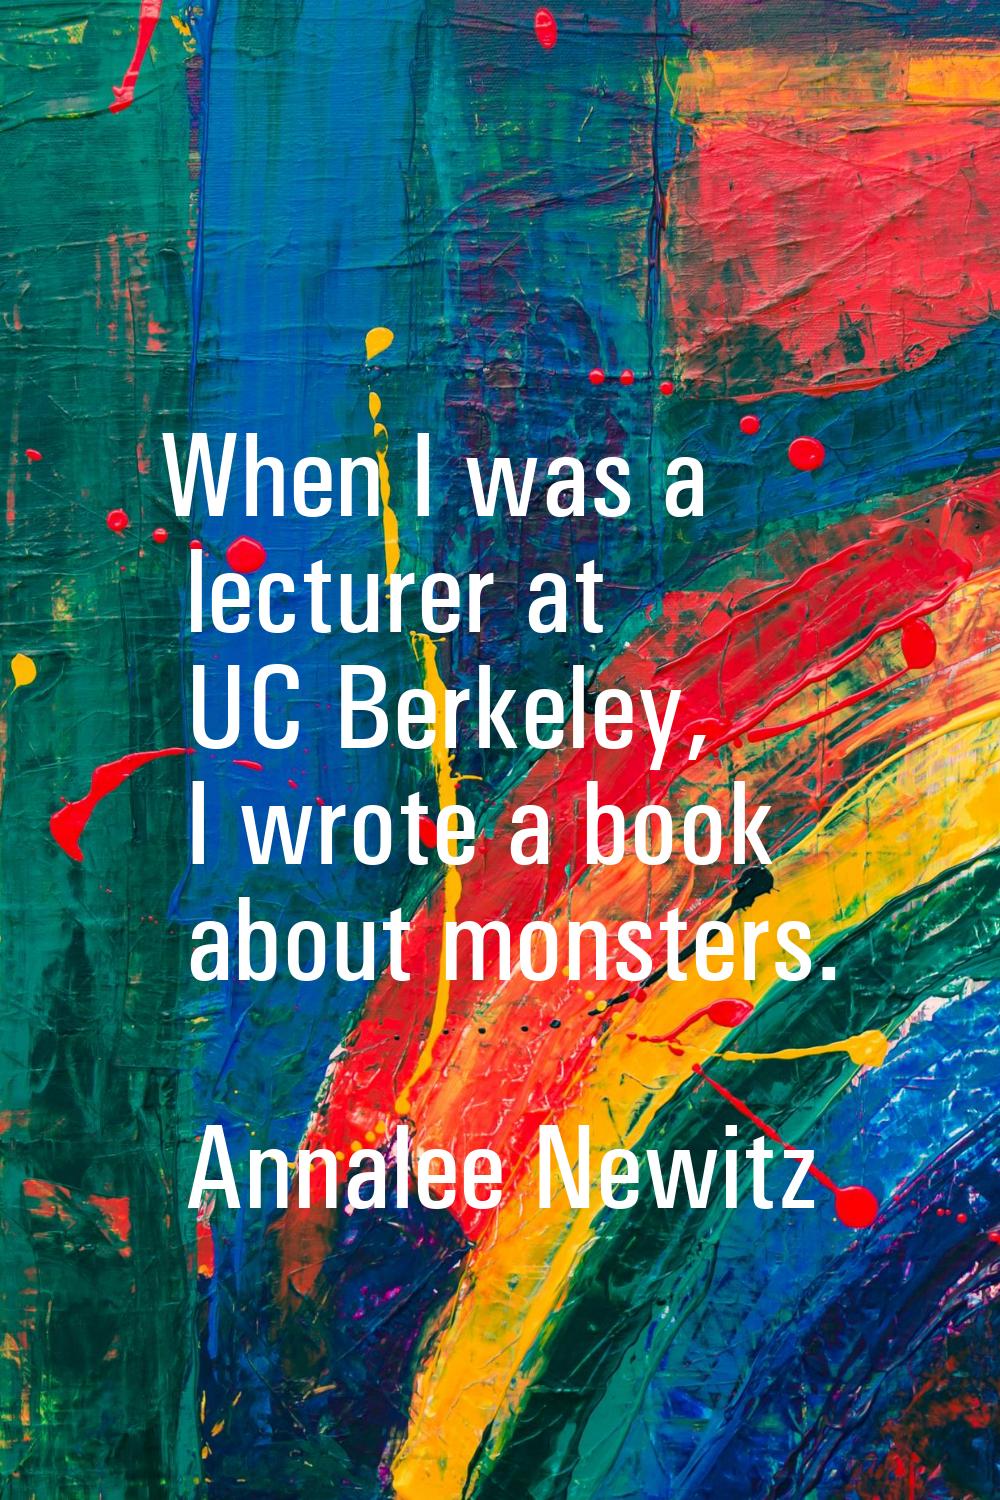 When I was a lecturer at UC Berkeley, I wrote a book about monsters.